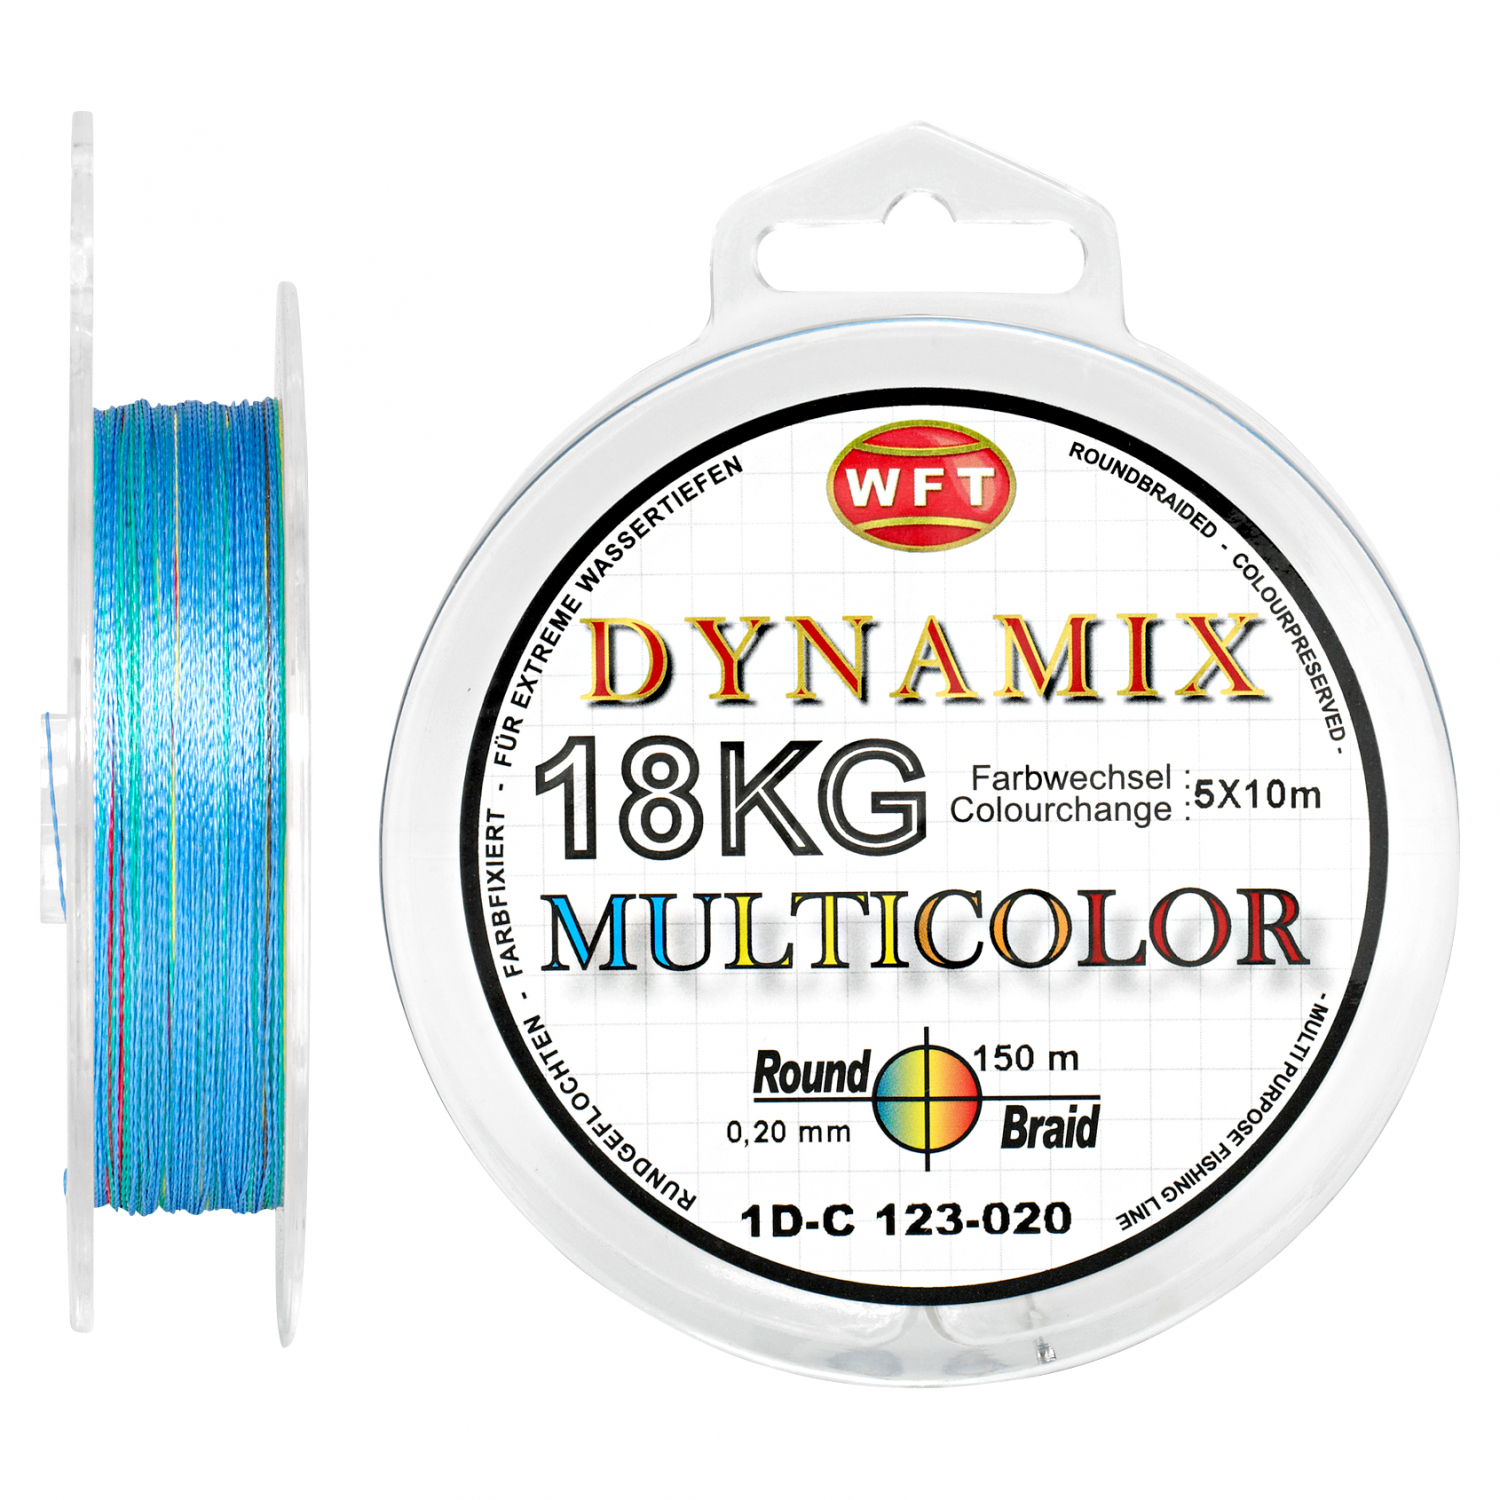 WFT Fishing Line Dynamix Round Braid (multicolor) at low prices